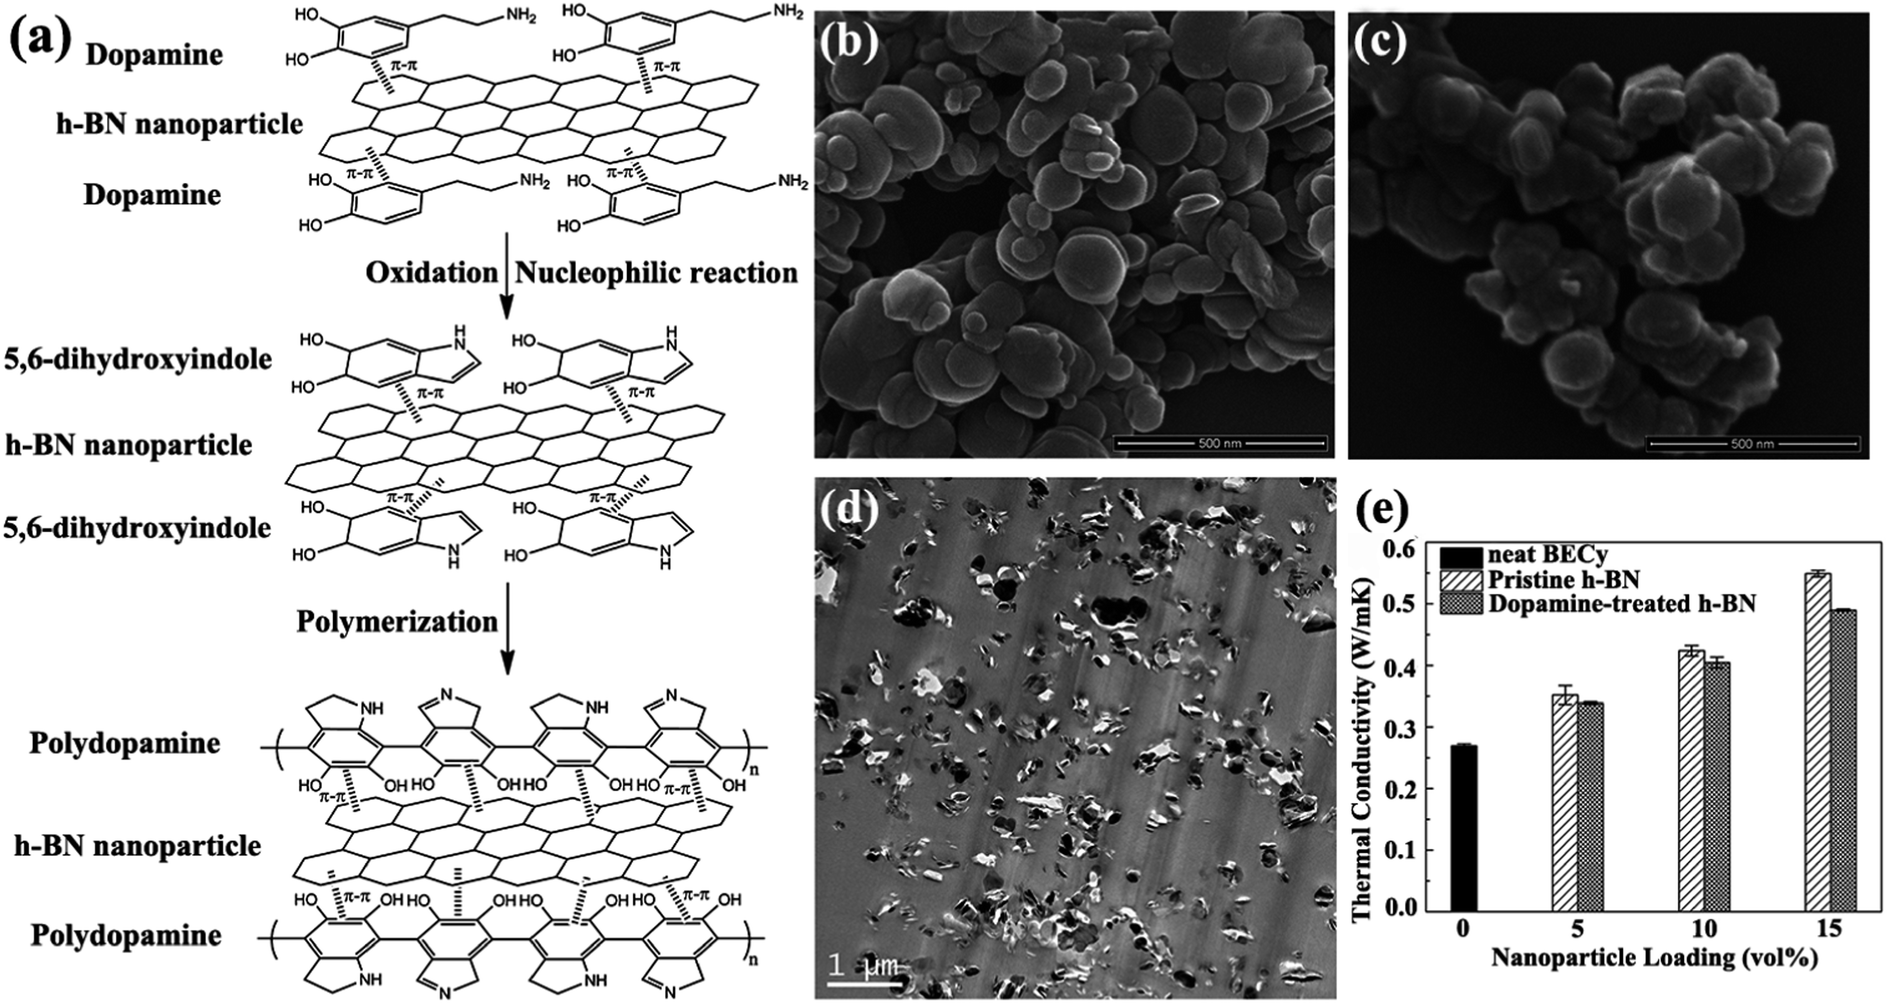 Polymer Composites Based On Hexagonal Boron Nitride And Their Application In Thermally Conductive Composites Rsc Advances Rsc Publishing Doi 10 1039 C8rah